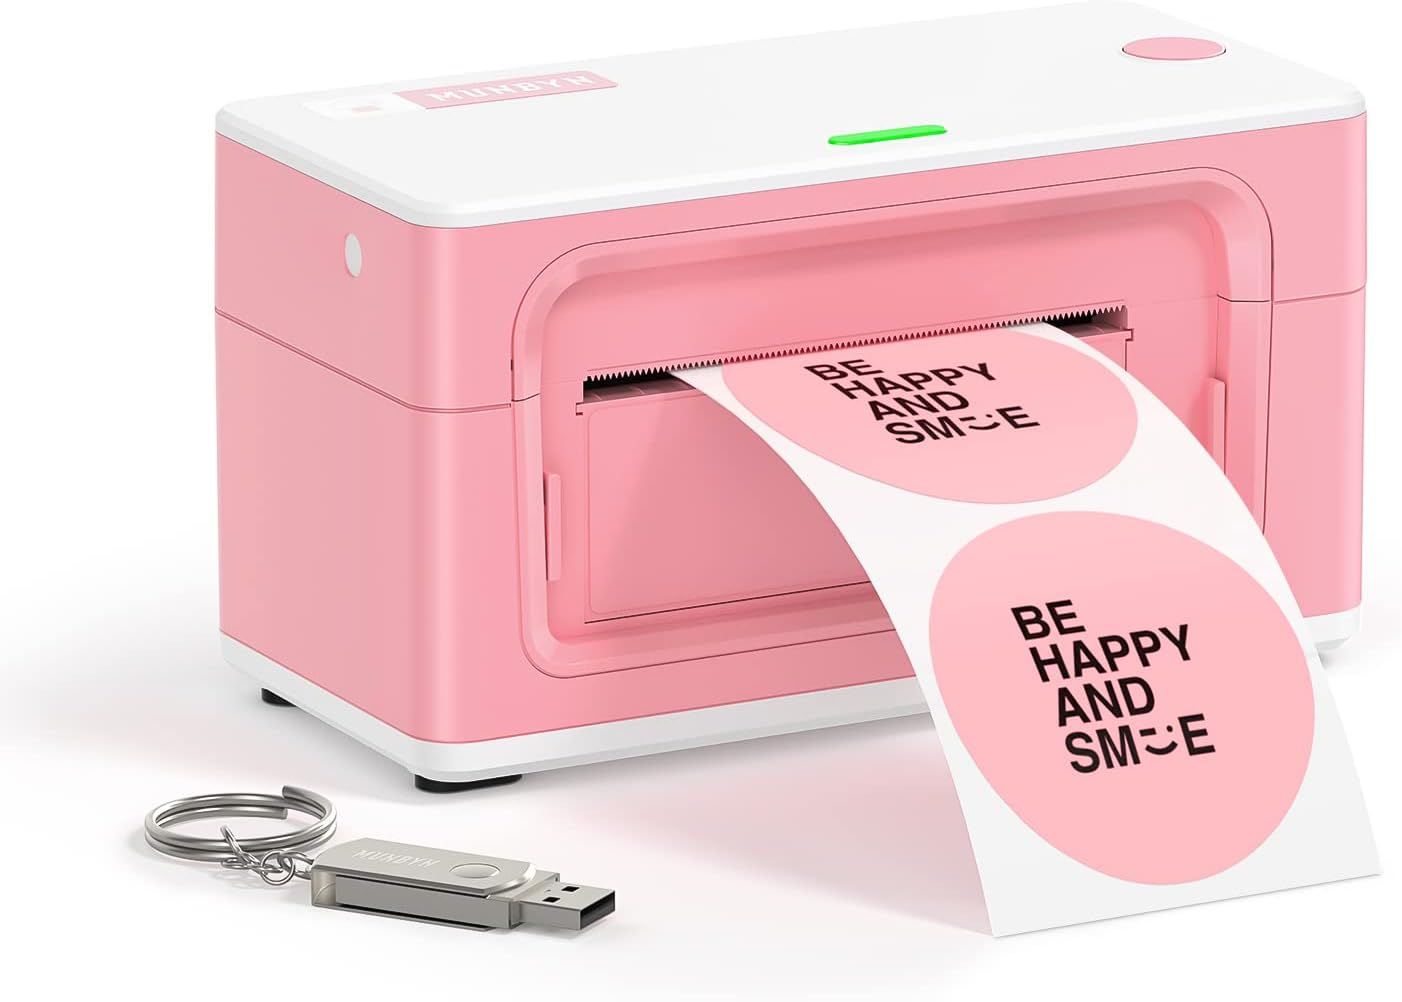 MUNBYN Pink Shipping Label Printer, [Upgraded 2.0] USB Label Printer Maker for Shipping Packages ... | Amazon (US)